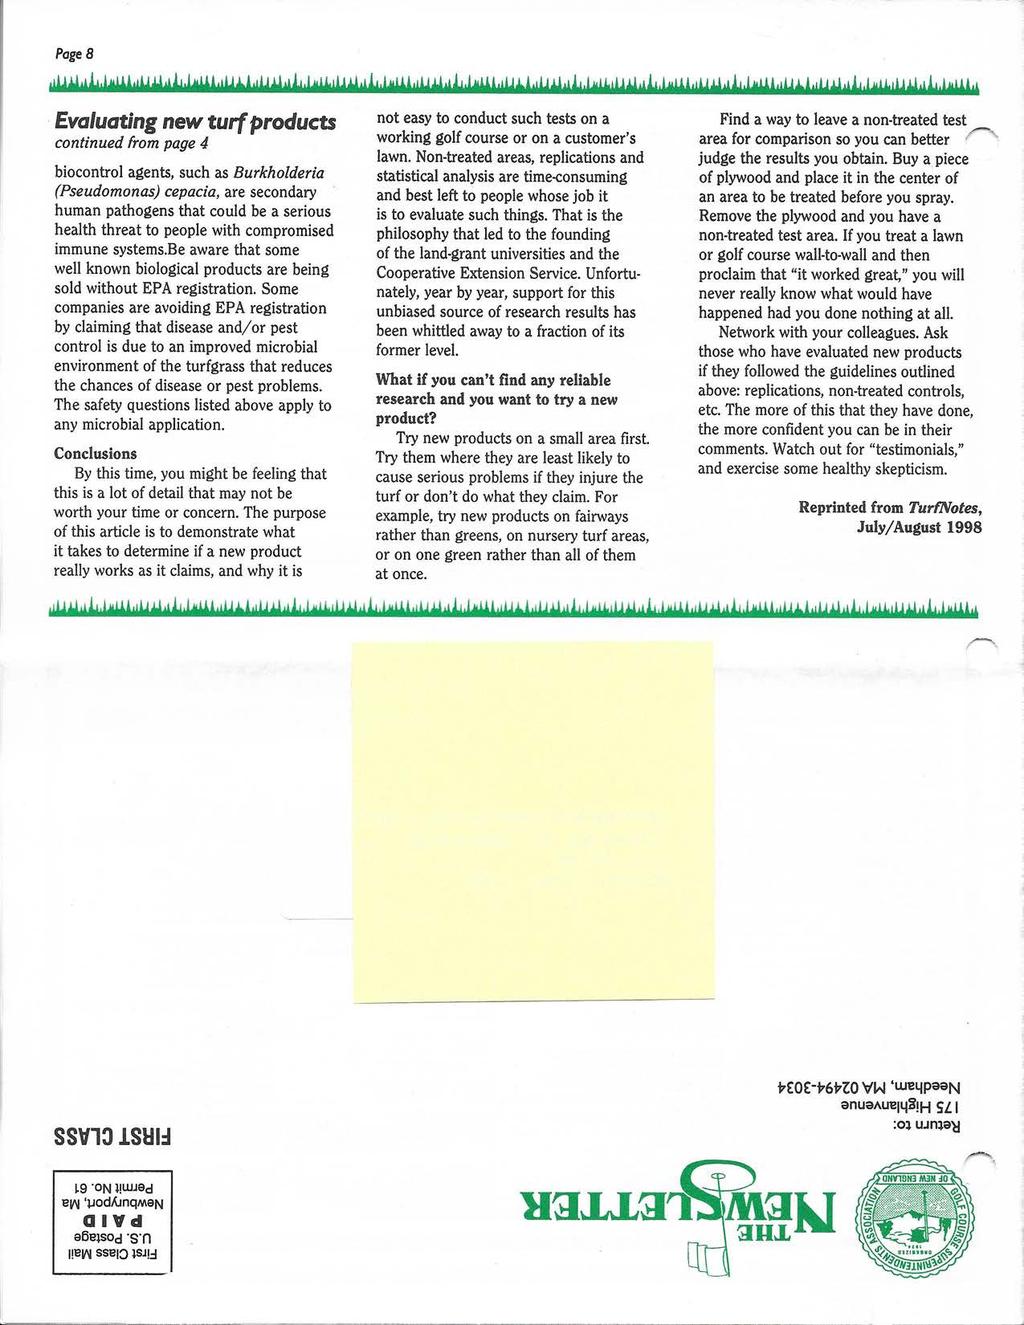 Page 6 Evaluating new turf products continued from page 4 biocontrol agents, such as Burkholderia (Pseudomonas) cepacia, are secondary human pathogens that could be a serious health threat to people